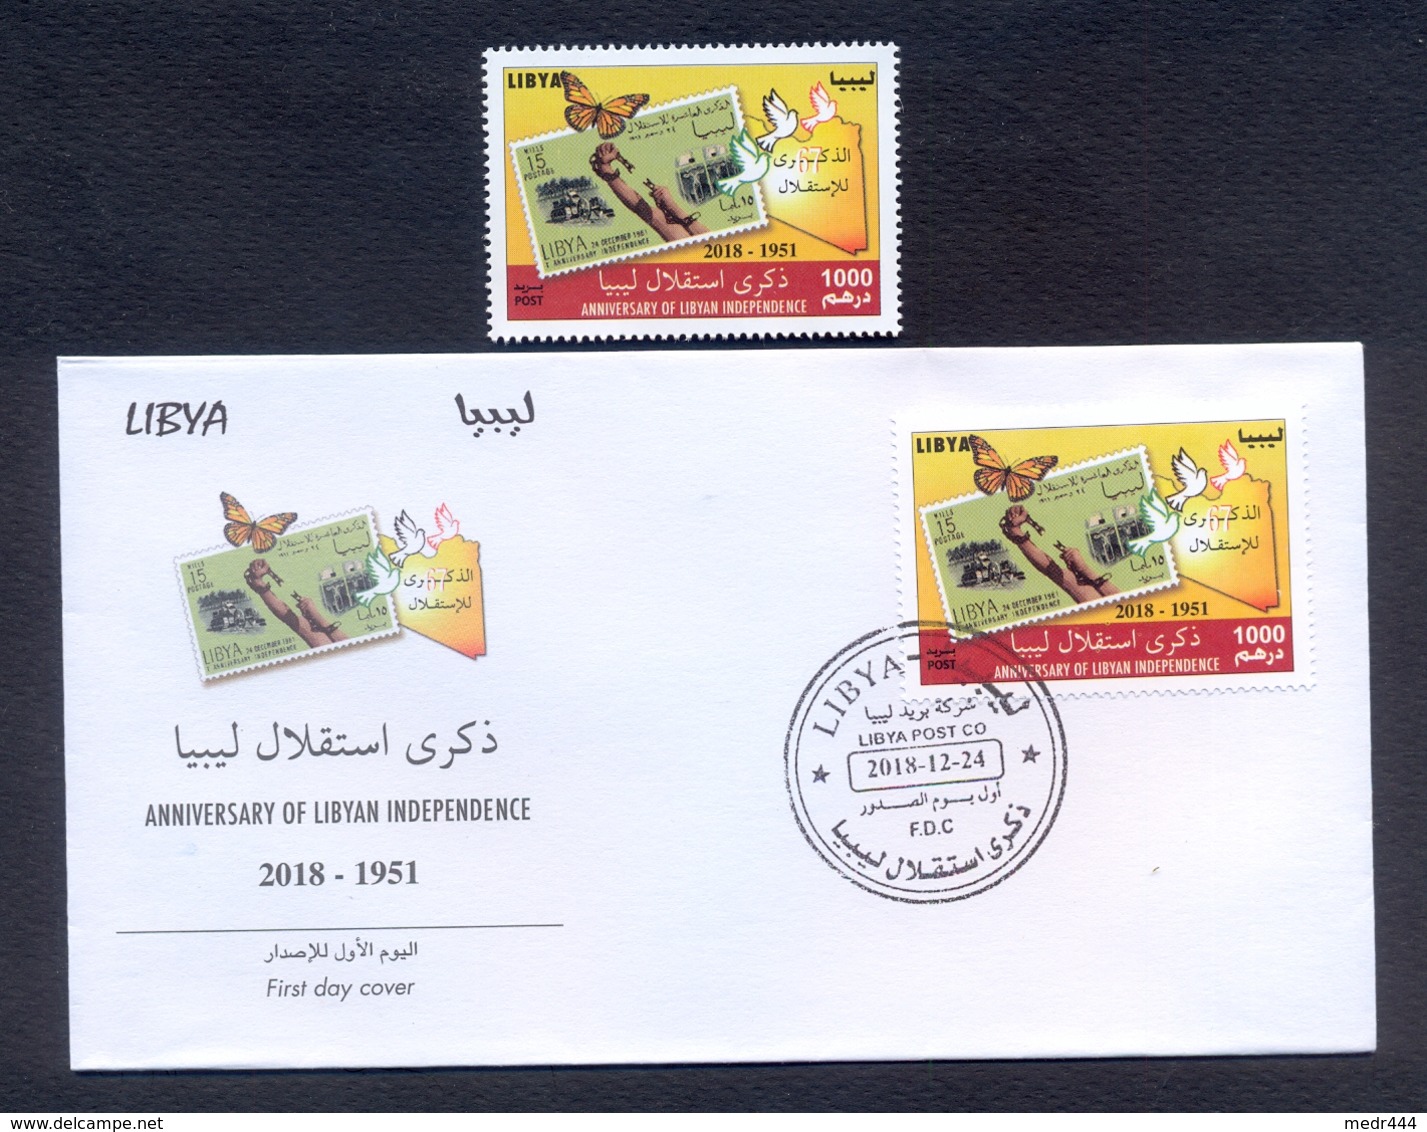 Libya 2018 - FDC + Stamp - Anniversary Of Libyan Independence -  MNH** Excellent Quality - Libya